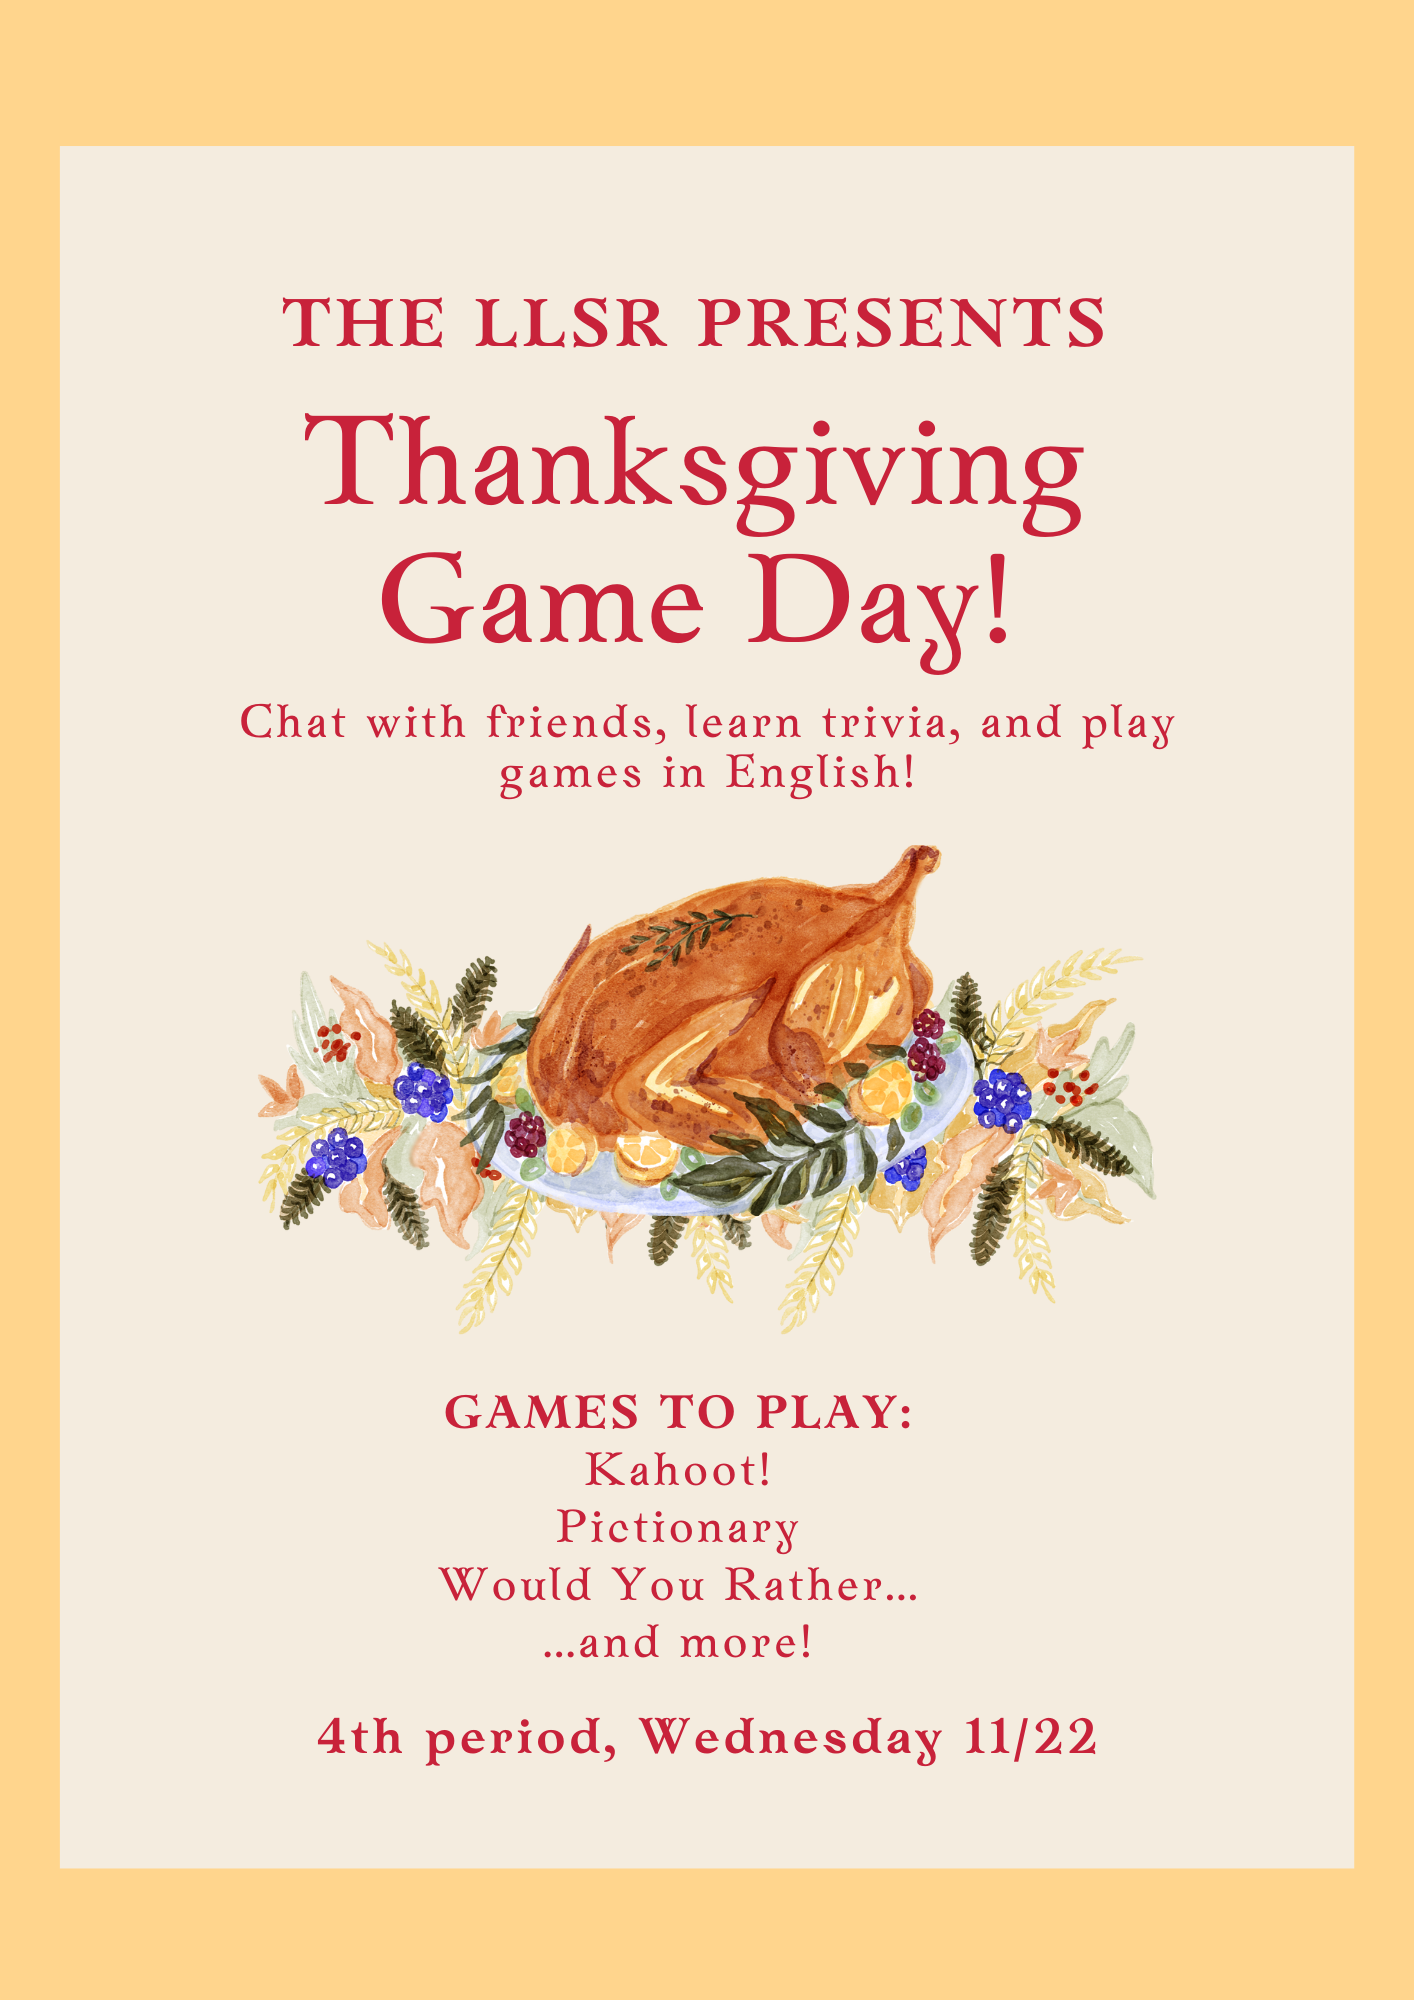 Thanksgiving Game Day poster for event in the LLSR on Wednesday, November 22nd, 2023